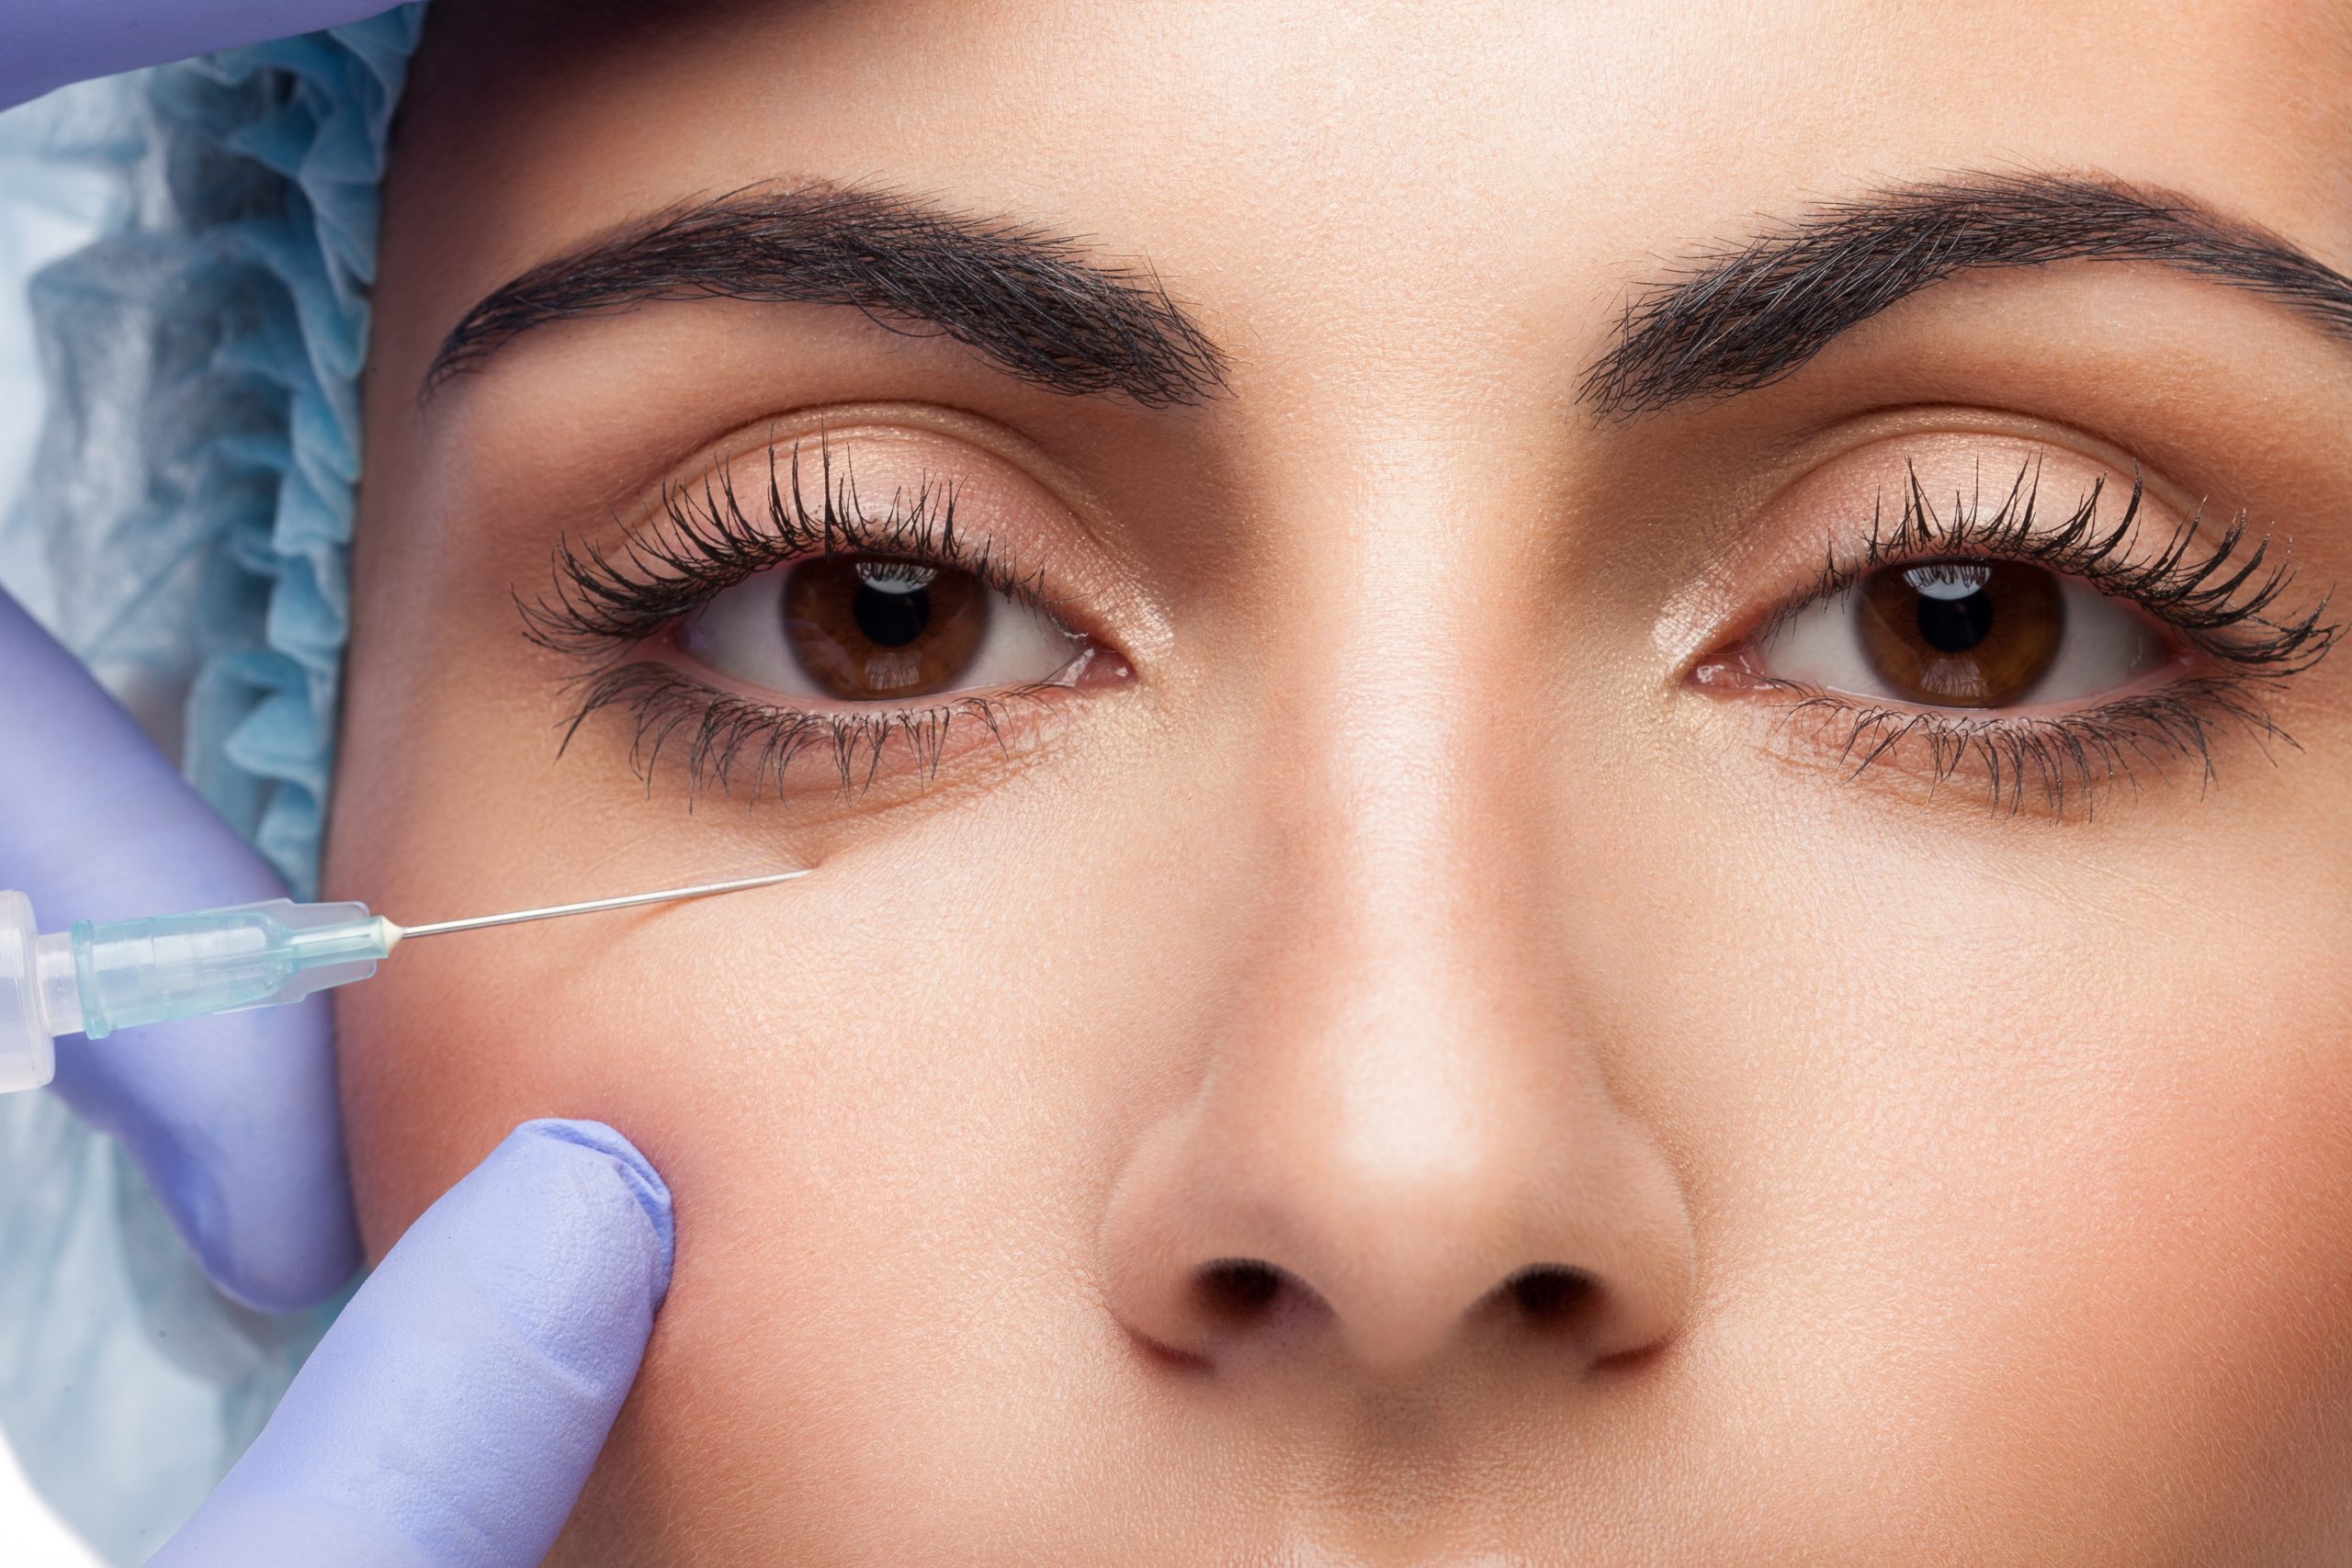 3 Causes of “Heavy Eyelids” – Early Signs of Aging